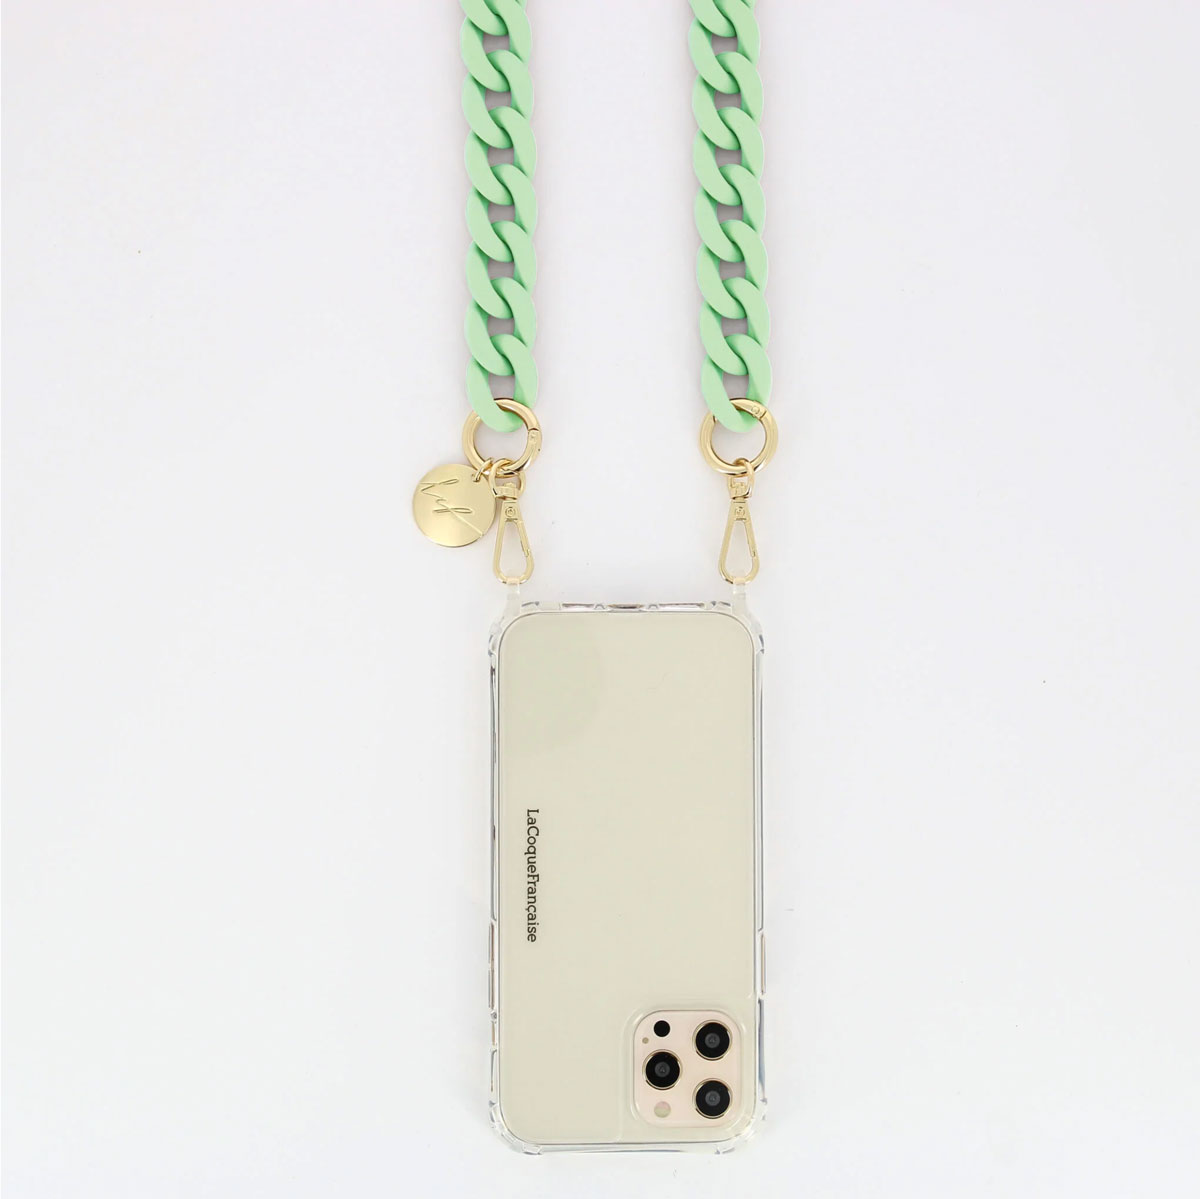 Stylish phone chain gifts for Christmas